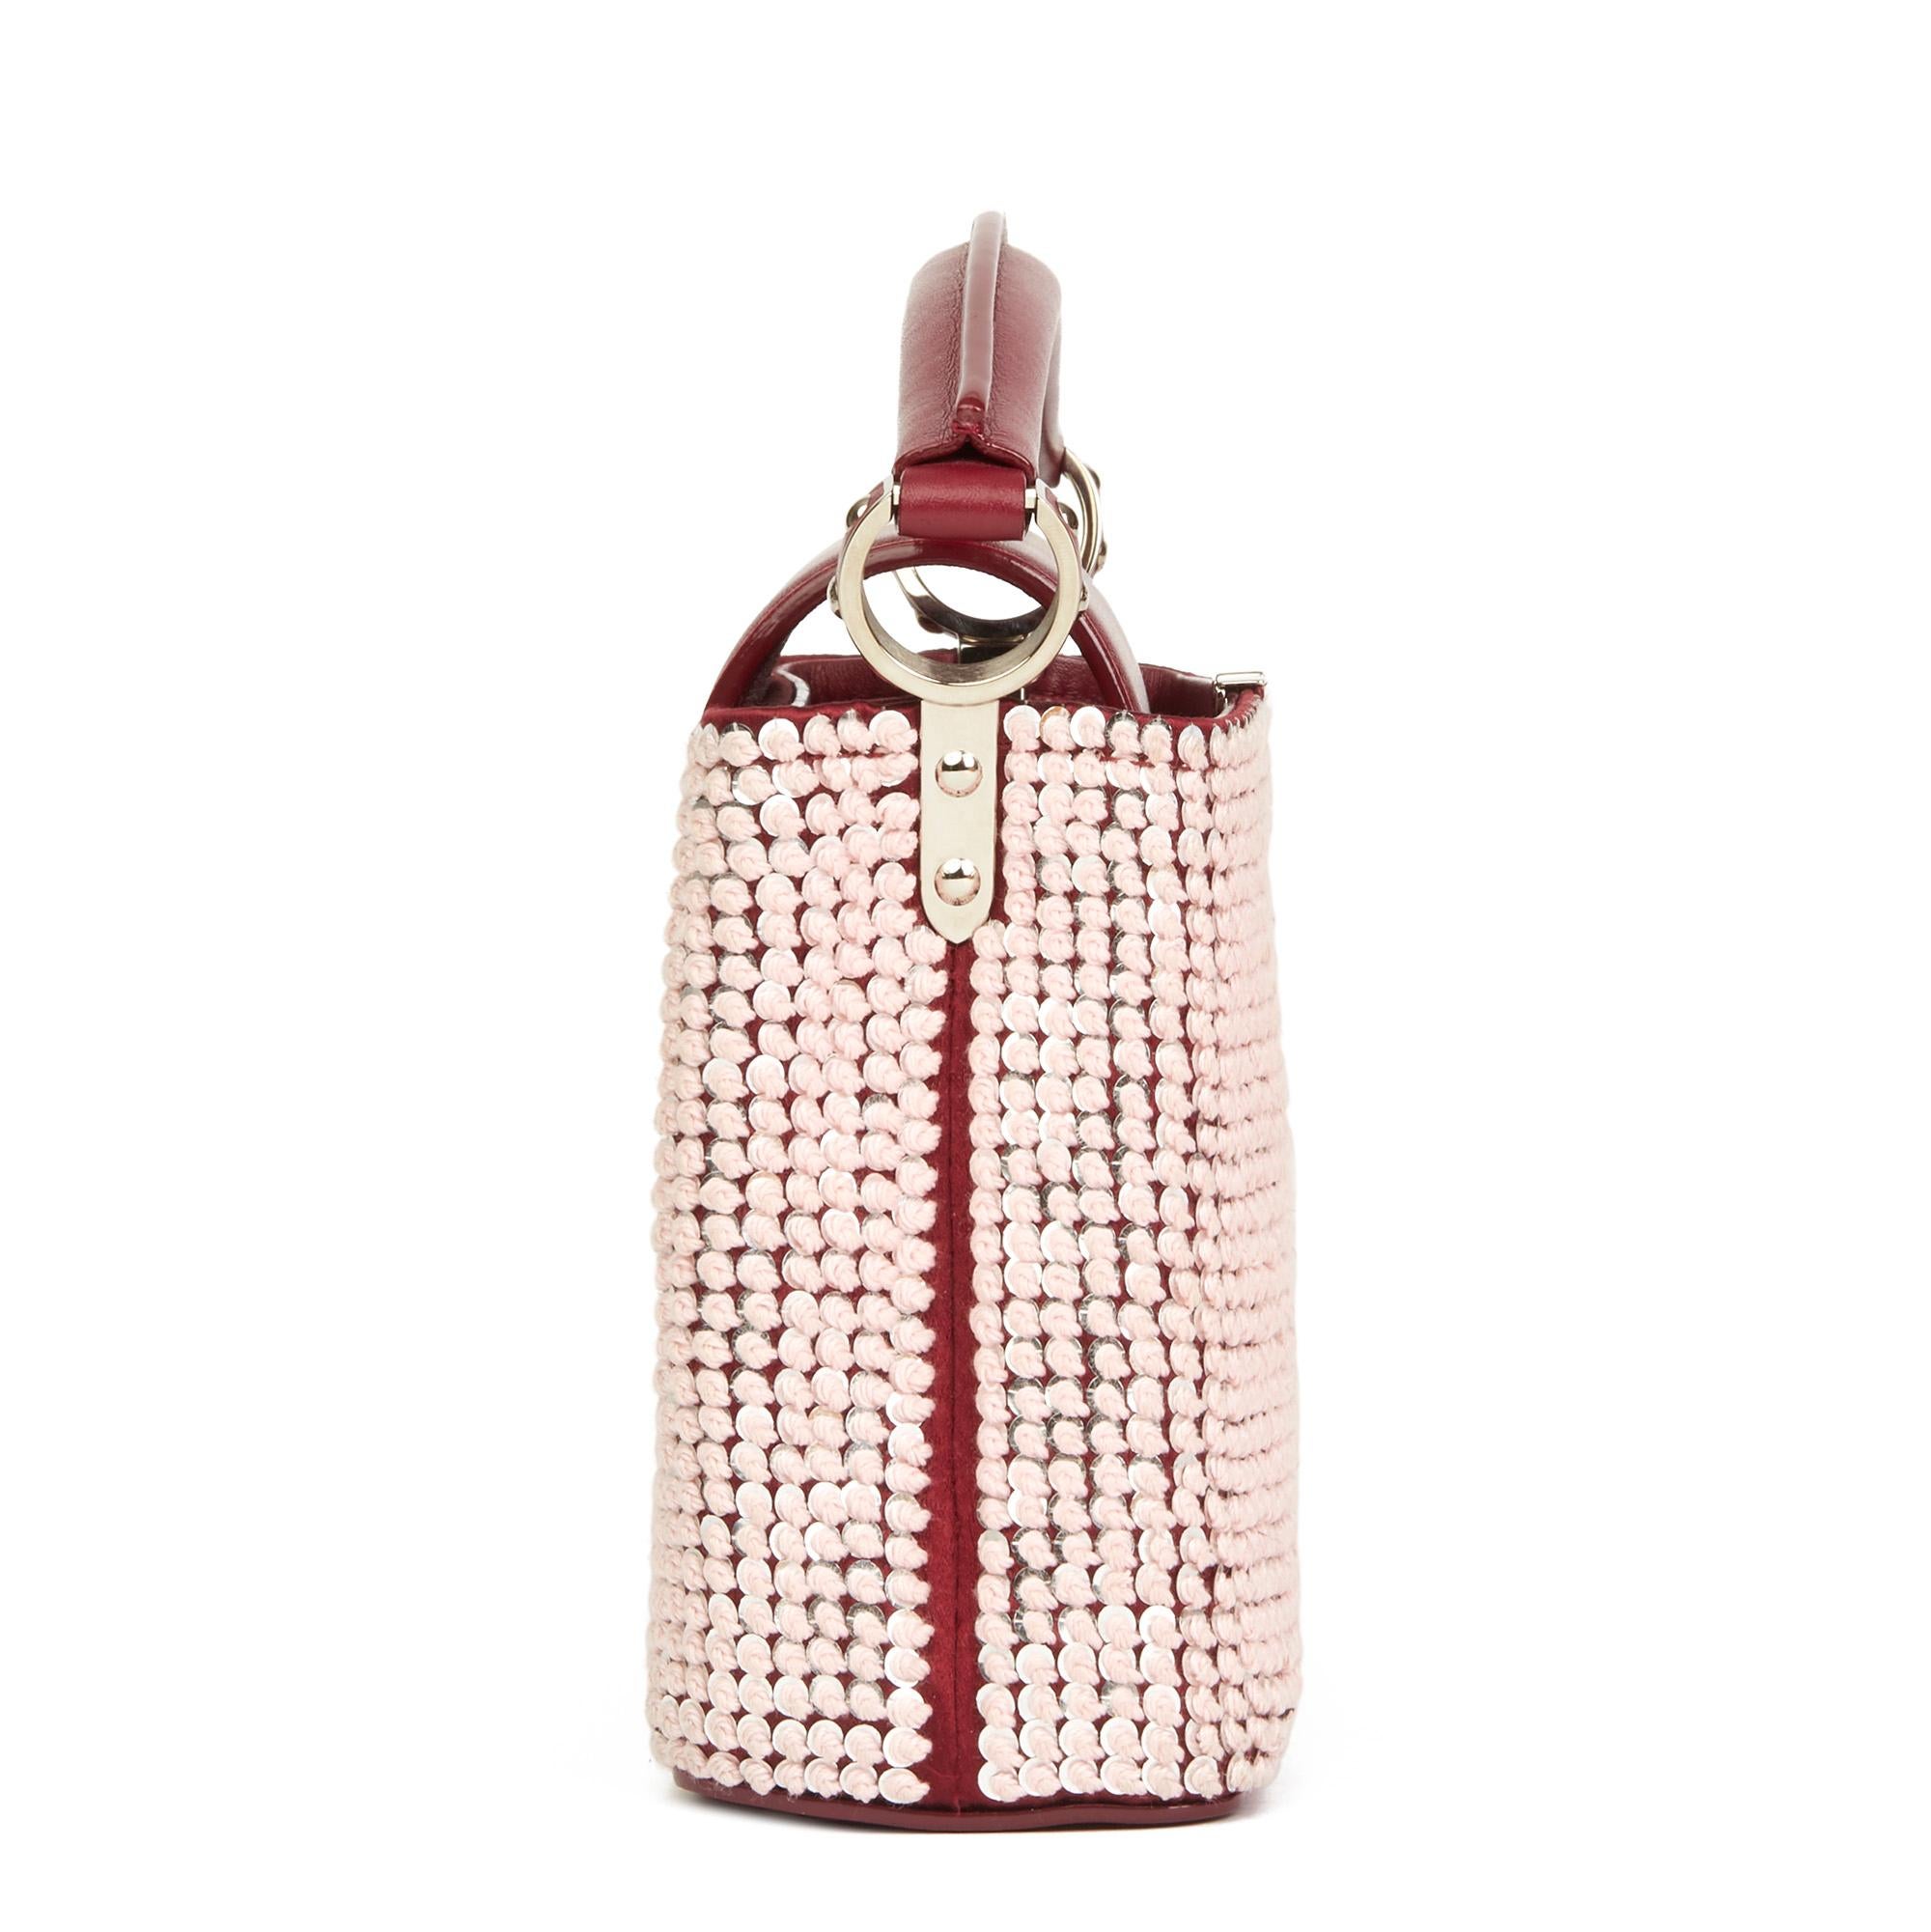 LOUIS VUITTON
Burgundy Sequin Embellished Smooth Calfskin Leather Capucines BB

Xupes Reference: HB2954
Serial Number: MI2156
Age (Circa): 2016
Accompanied By: Louis Vuitton Dust Bag, Box, Care Booklet, Shoulder Strap
Authenticity Details: Date